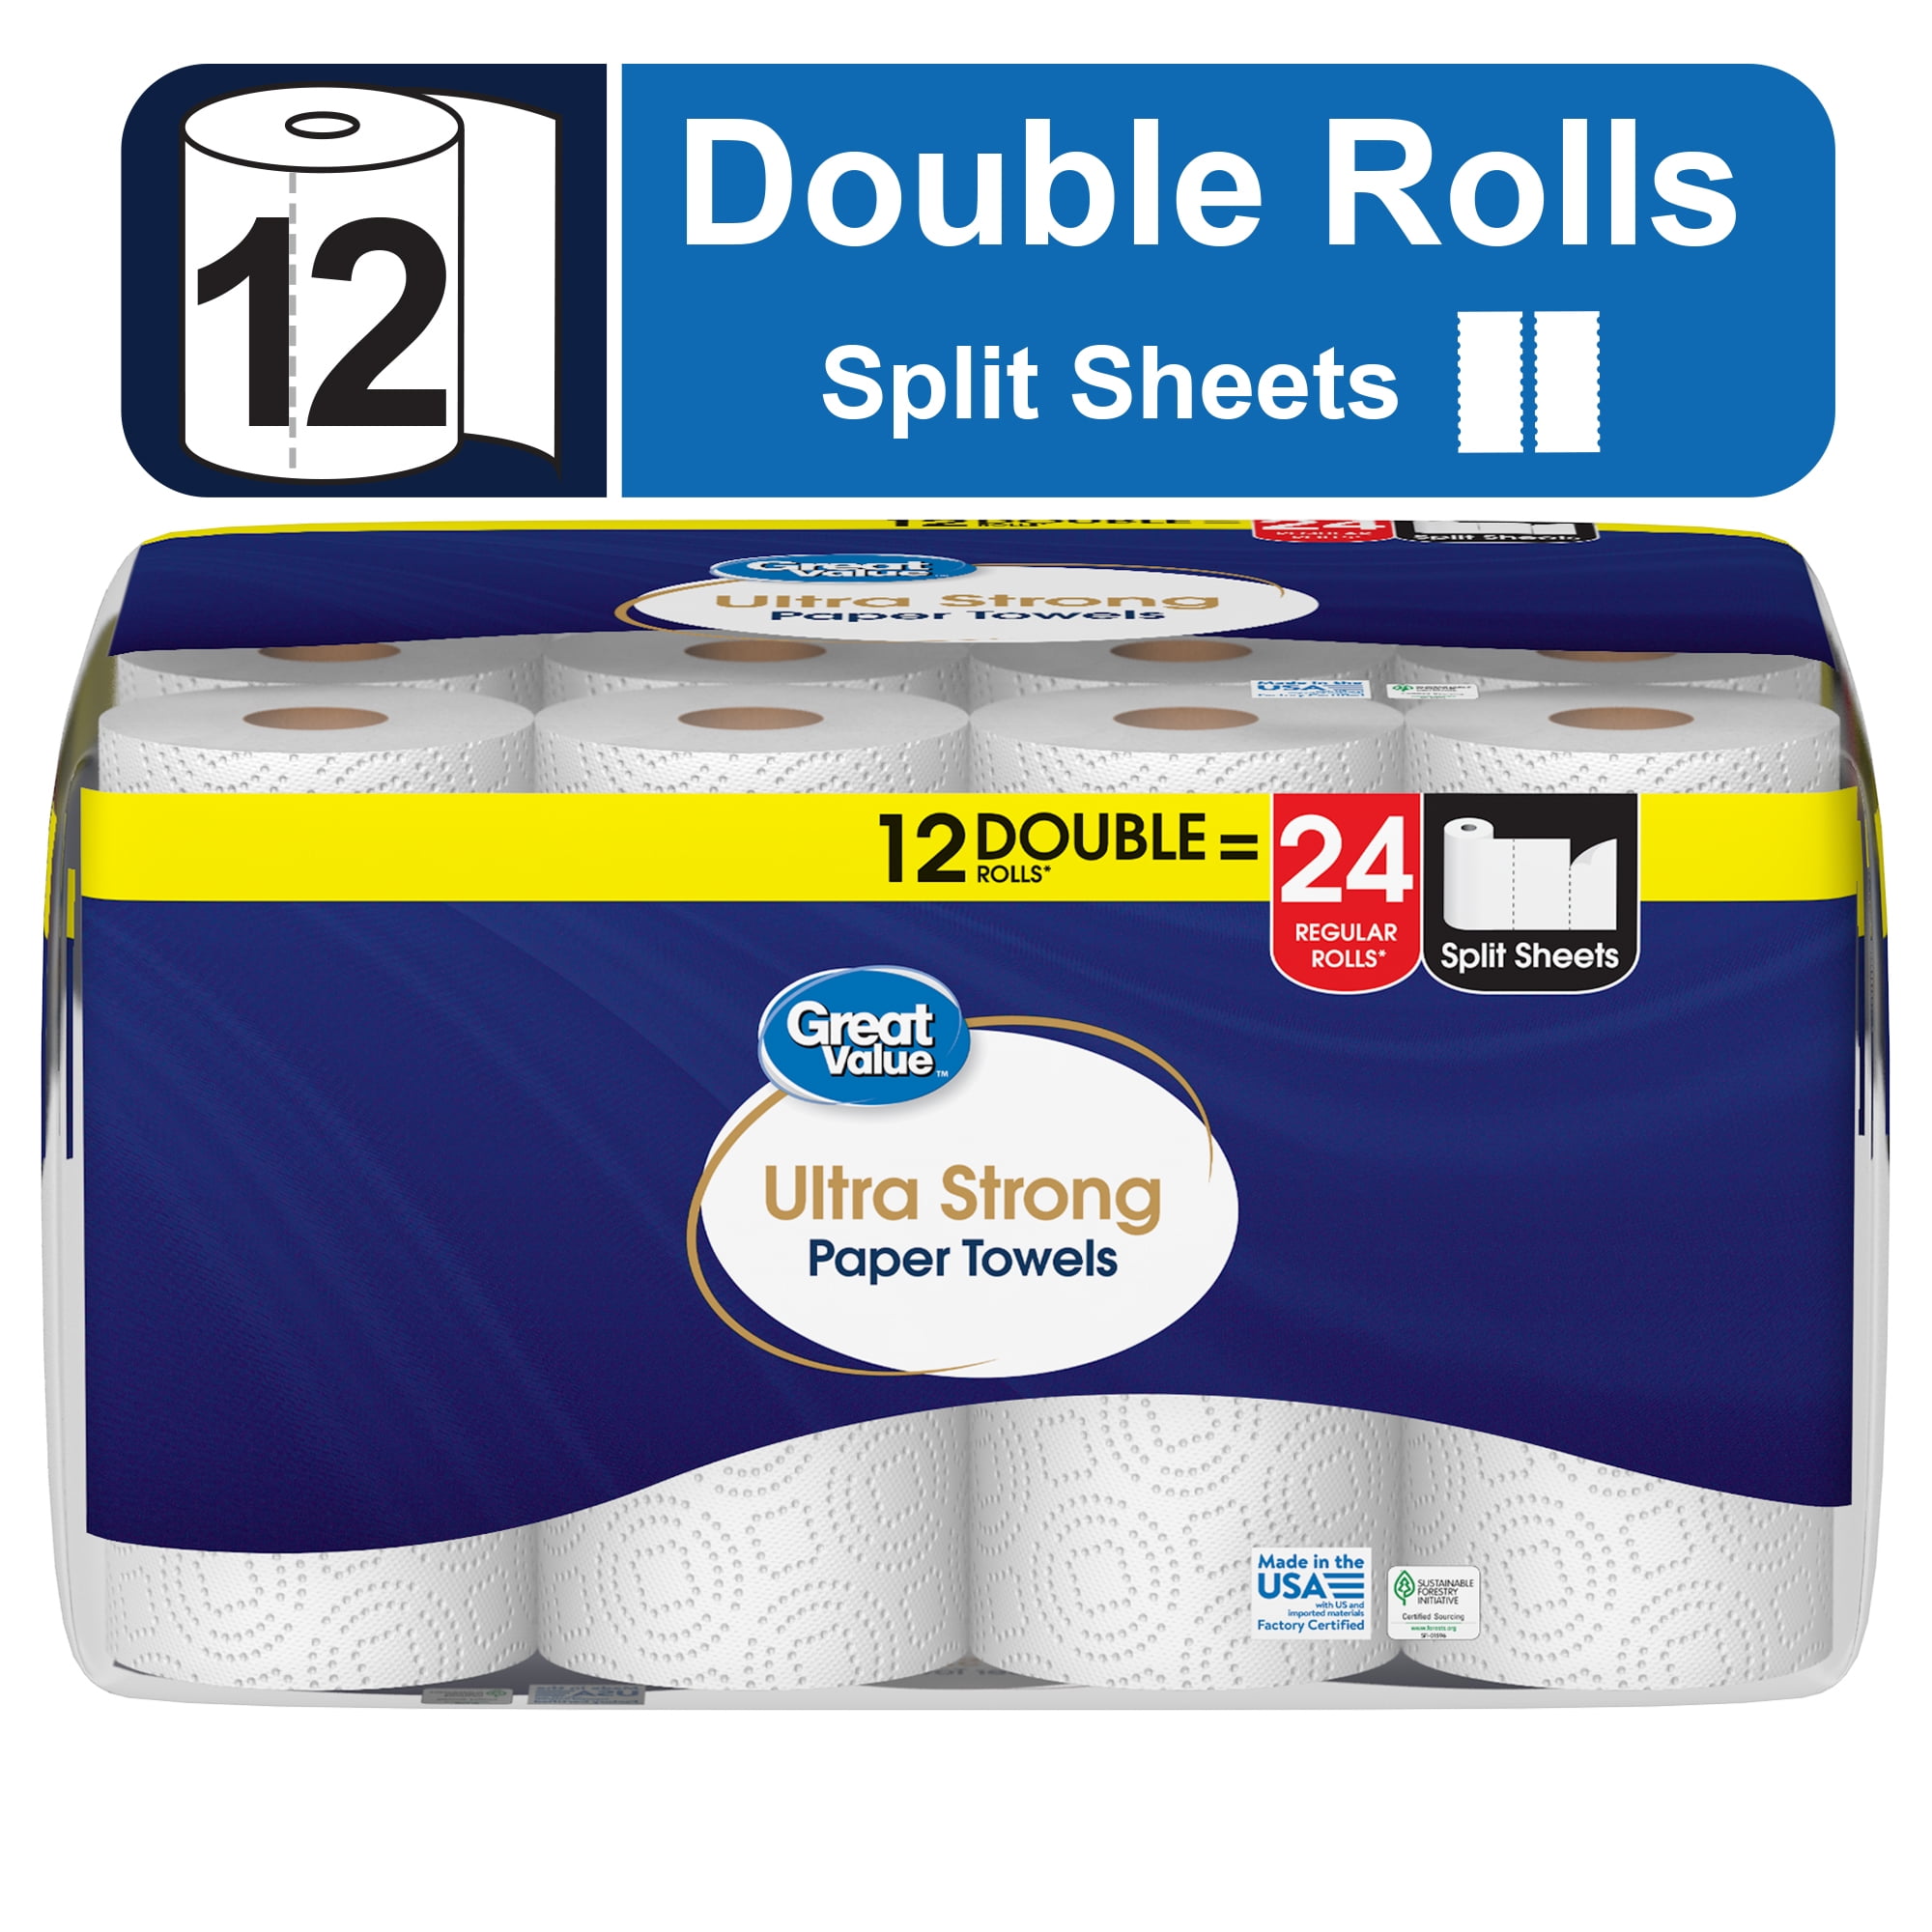 Great Value Ultra Strong Paper Towels, White, 12 Double Rolls - Walmart.com